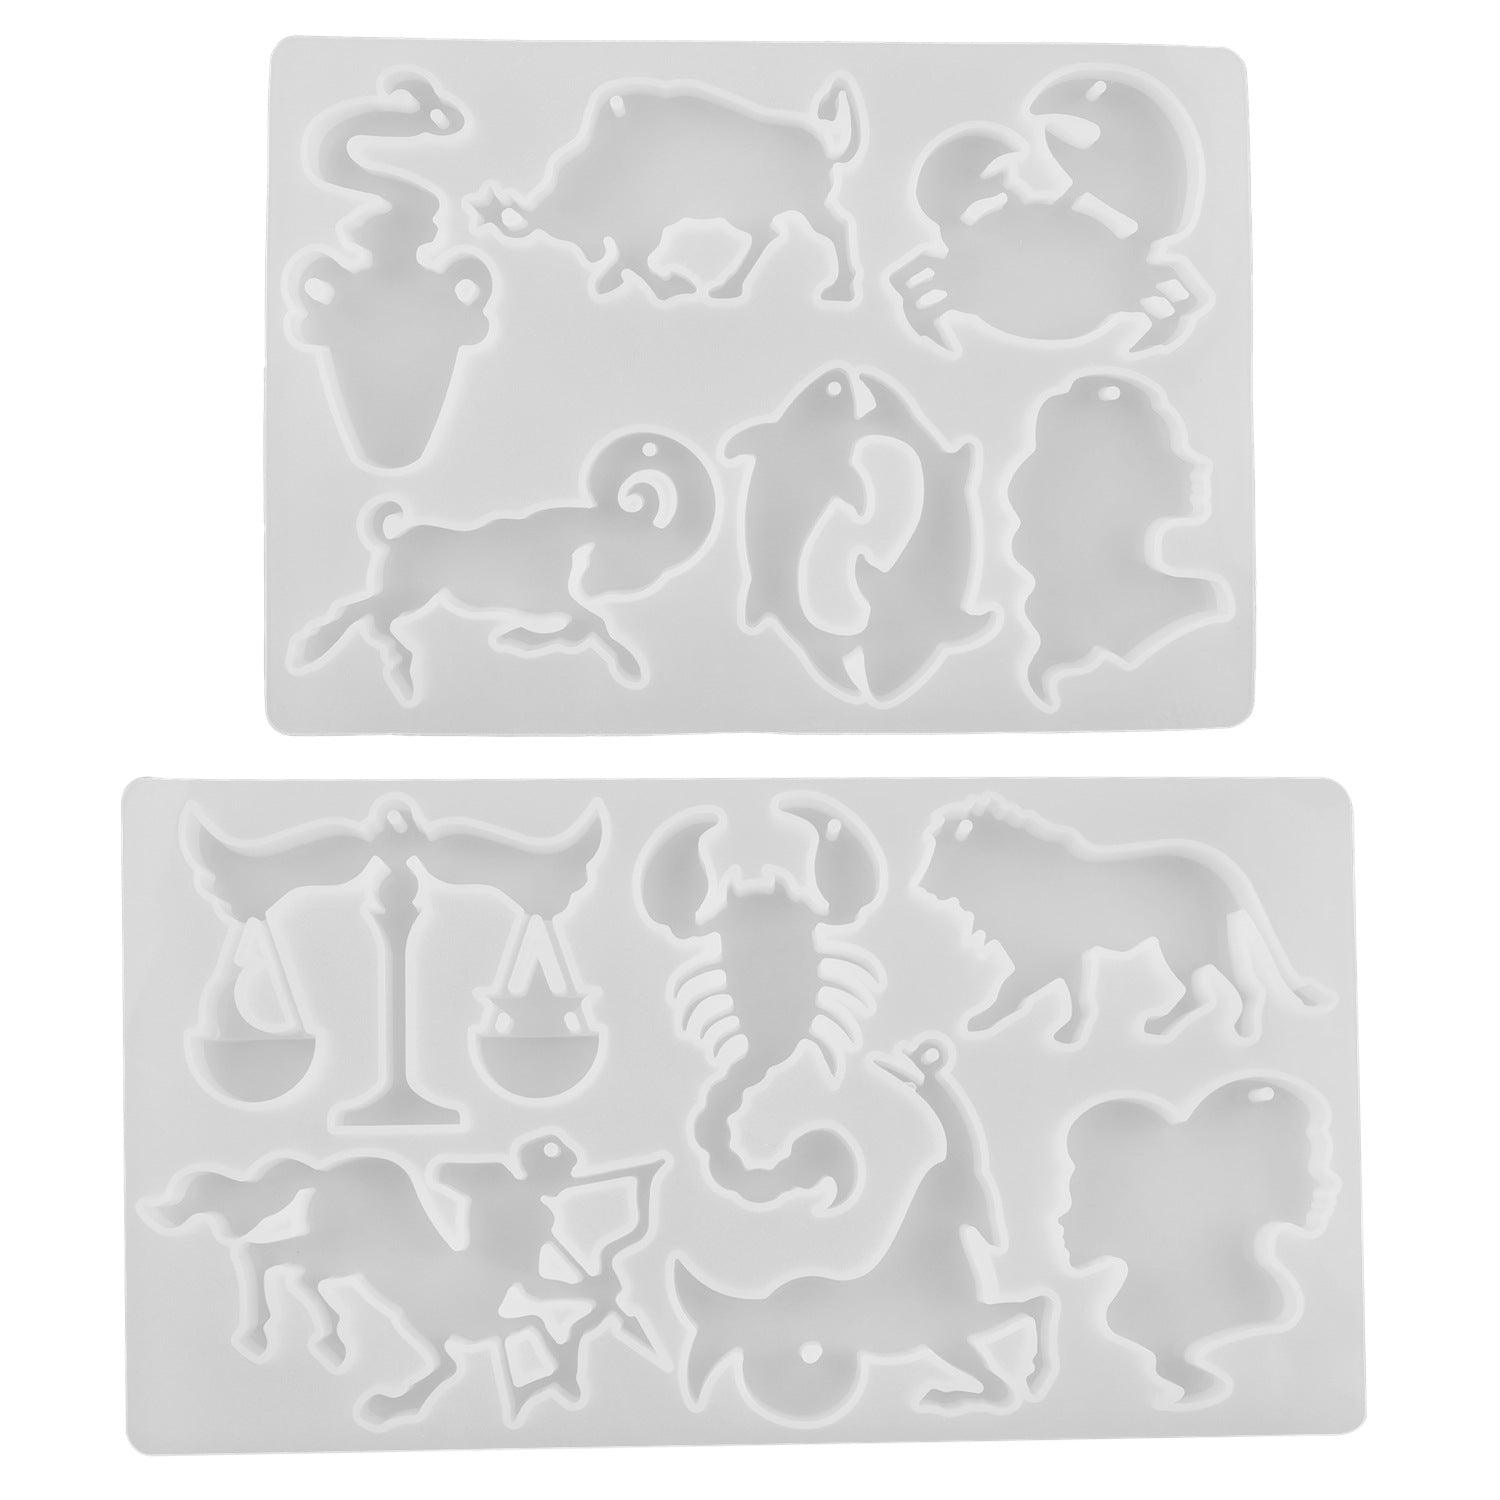 Zodiac Resin Molds, 12 Constellation Animals Keychain Silicone Mold, Unique  Epoxy Resin Casting Molds, Pendant Mold for DIY Jewelry Pendant Earrings